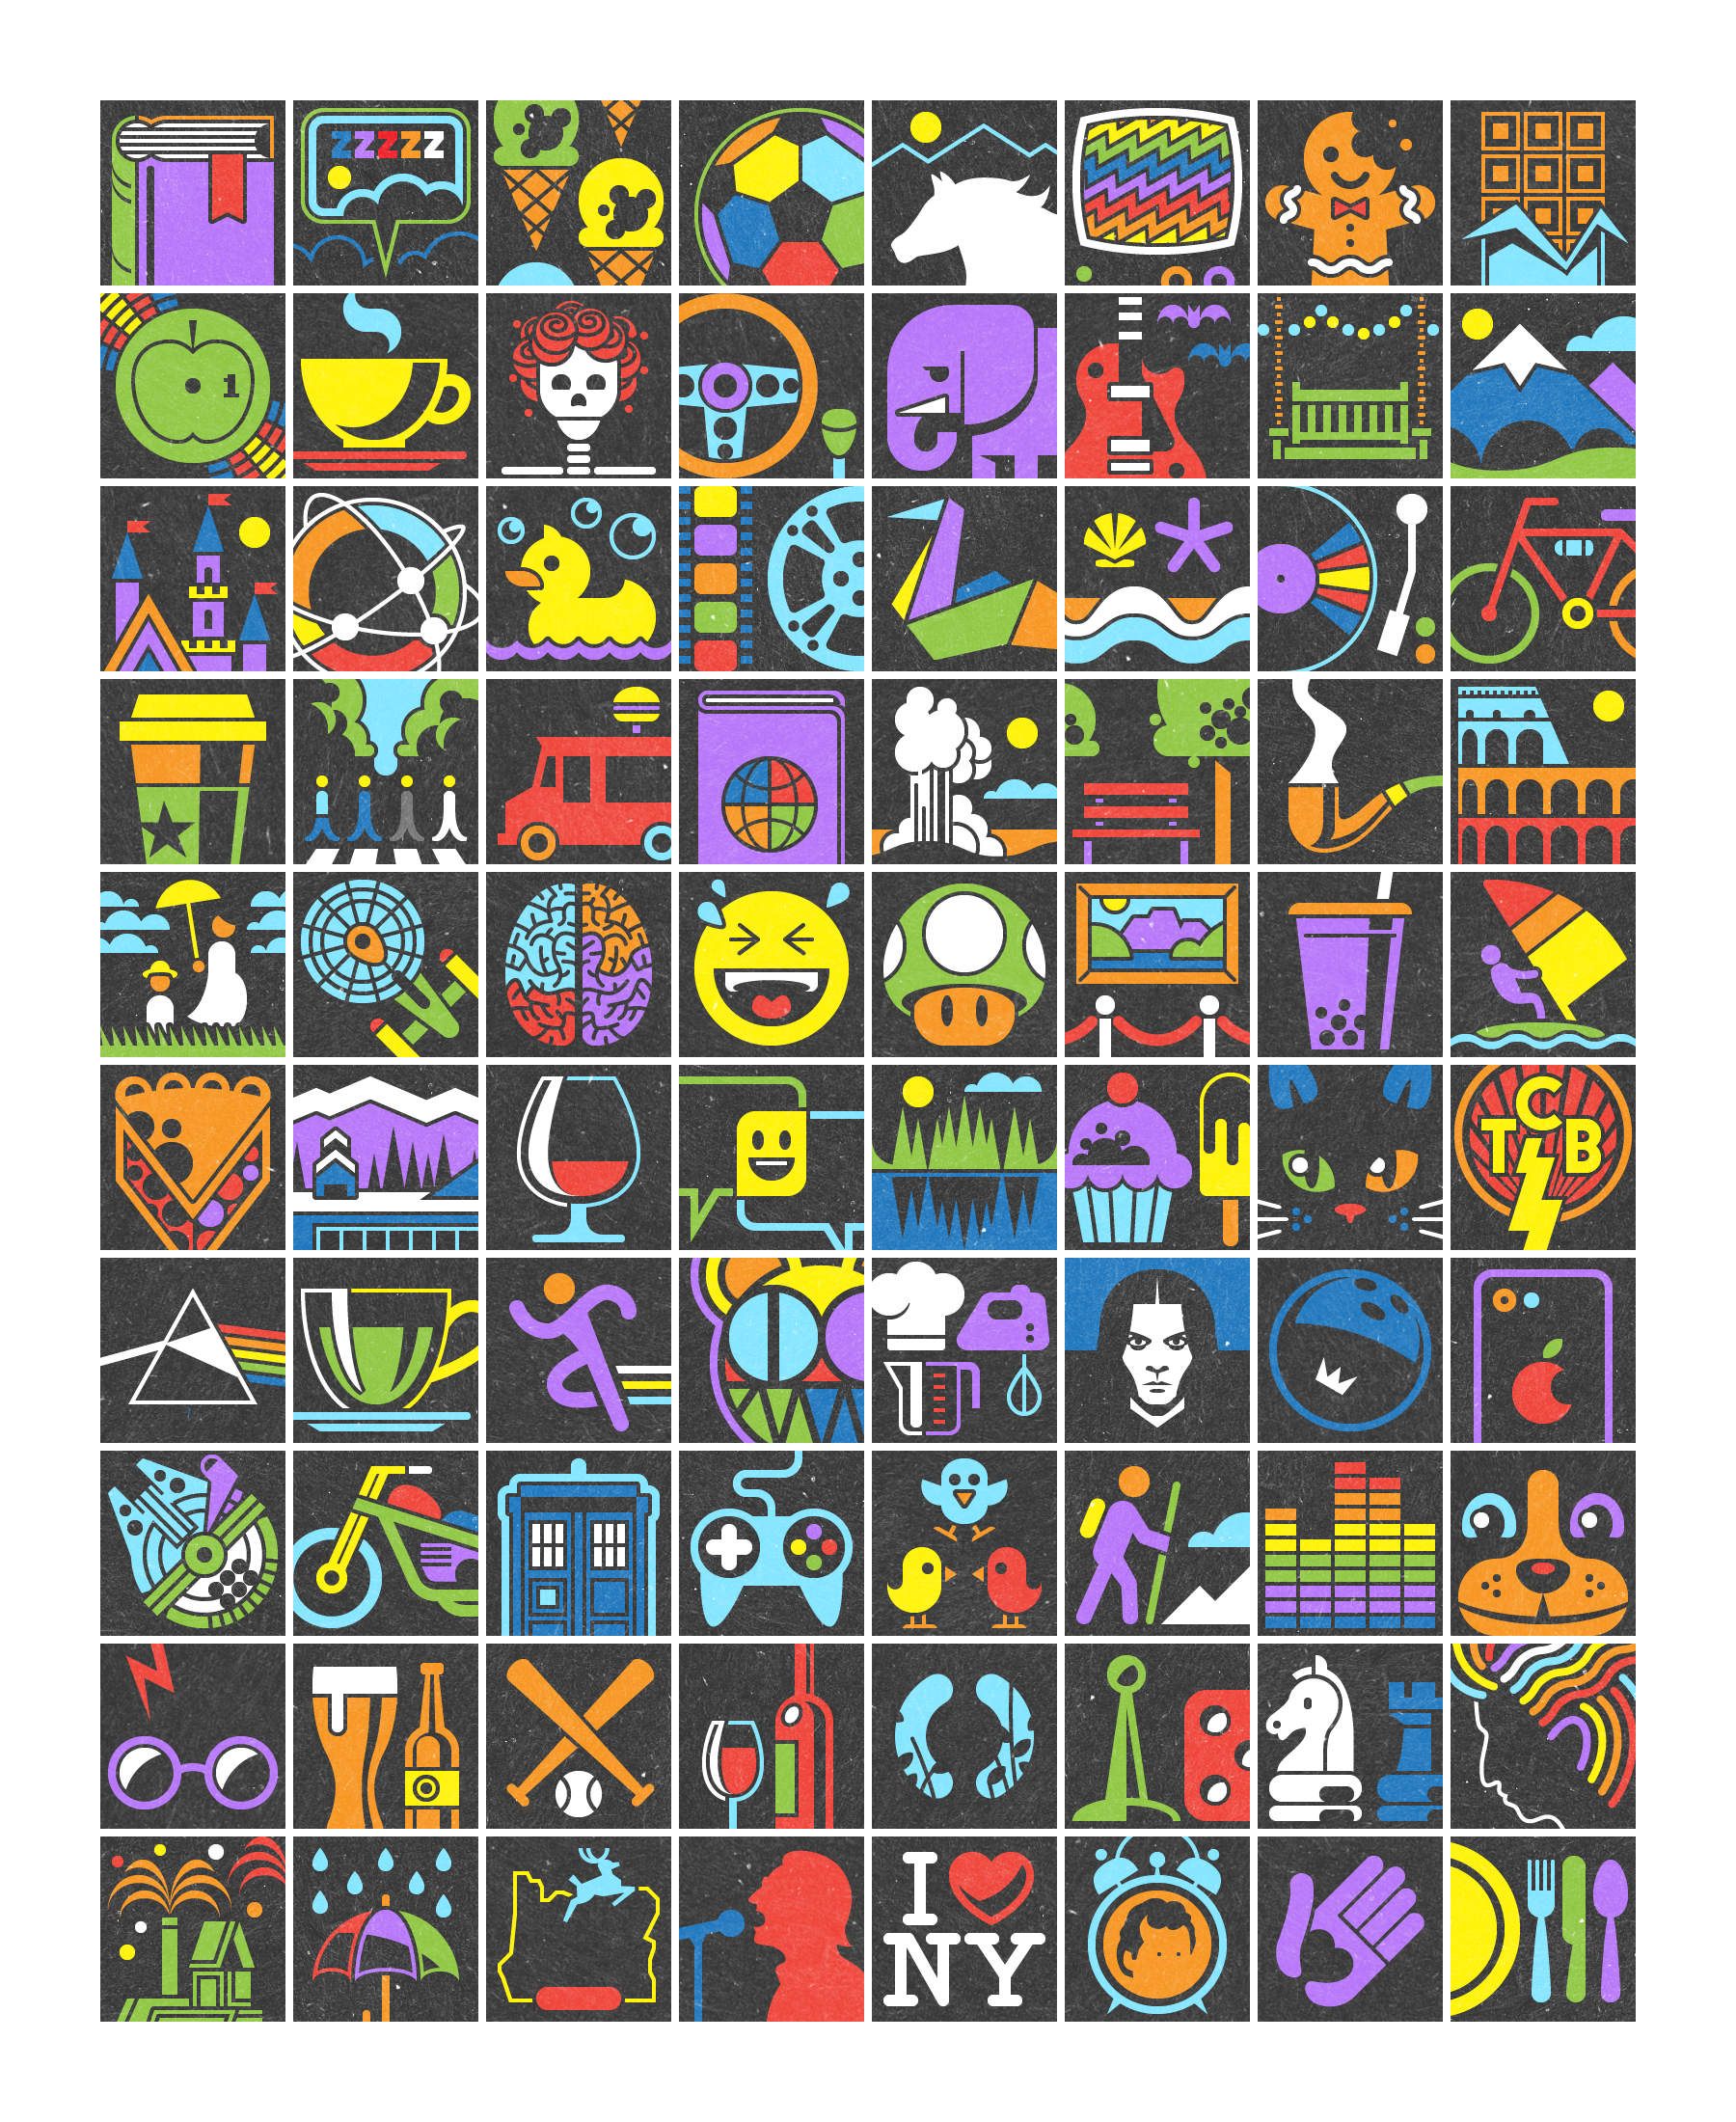 80 illustrated icons representing everything from cats and baseball to sleeping and Star Trek